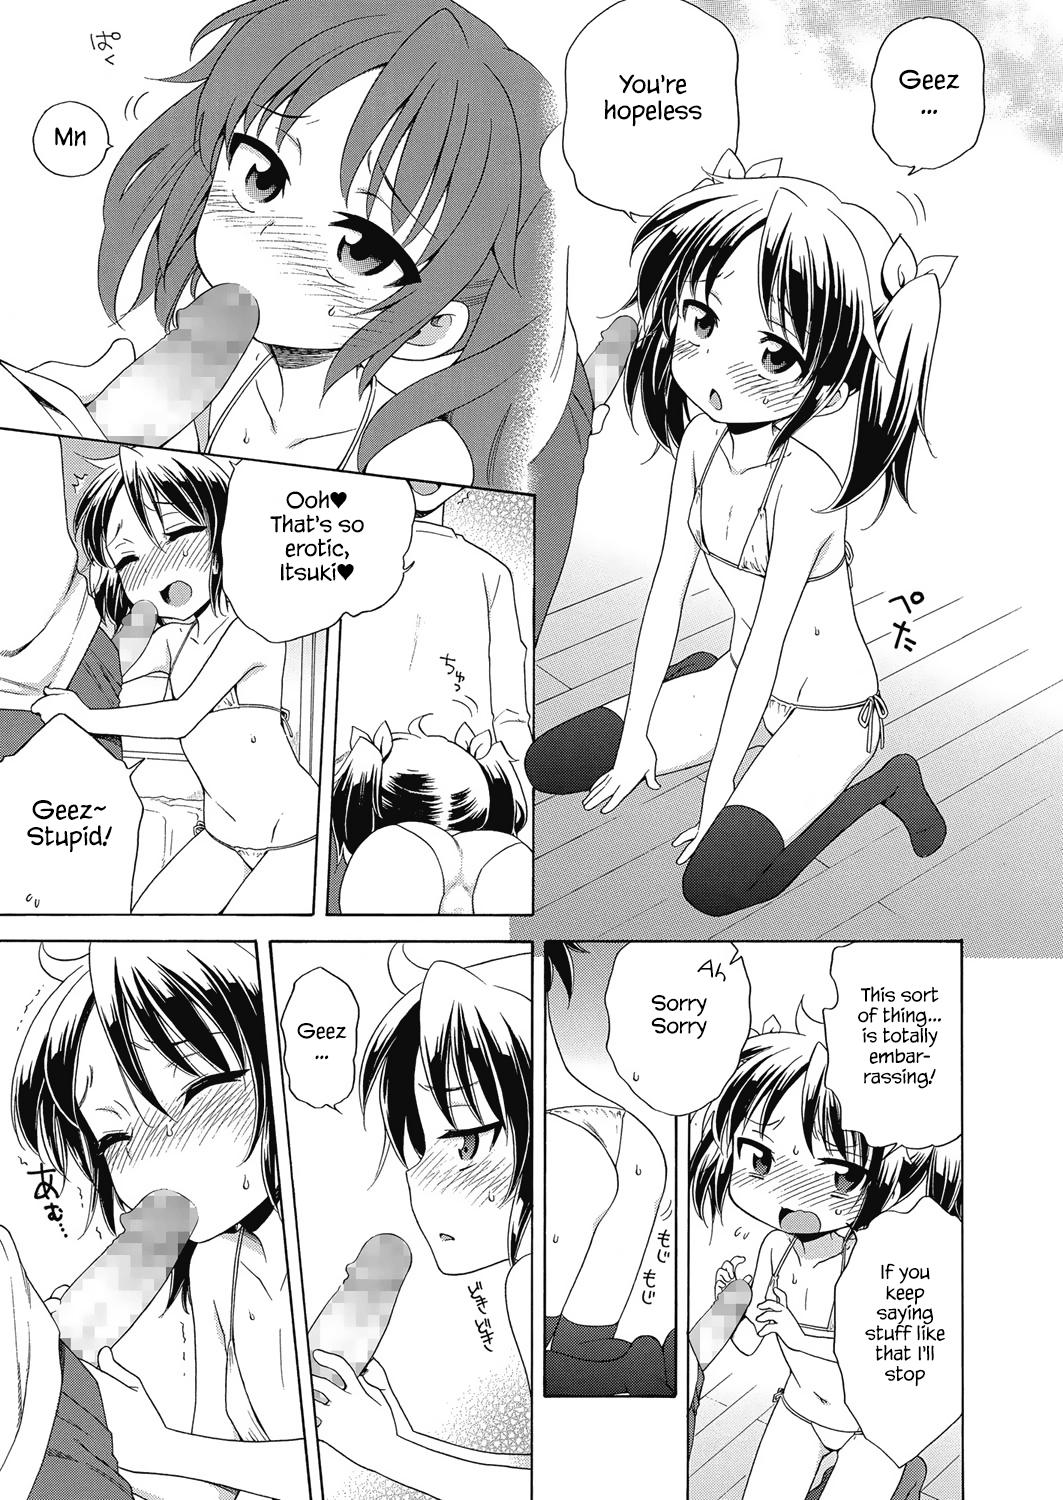 Deepthroat Itsumo, Mite Itai. | I Want to See This Forever. Indian Sex - Page 5